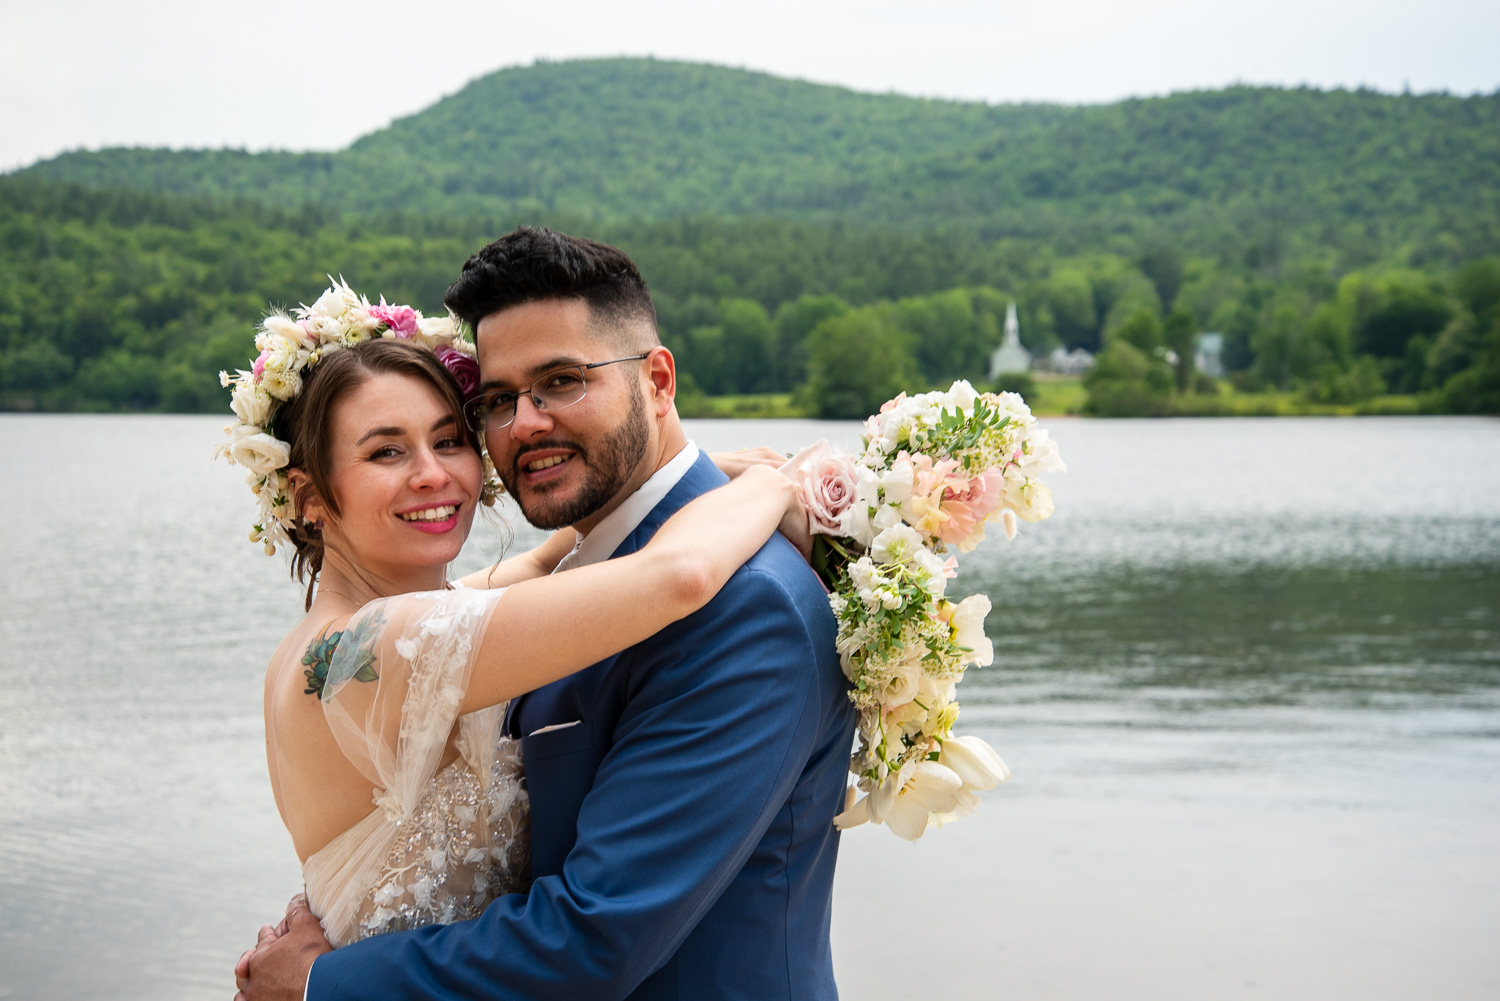 The Bride hugging the groom with the lake and little white church in the background on the sweetest wedding day